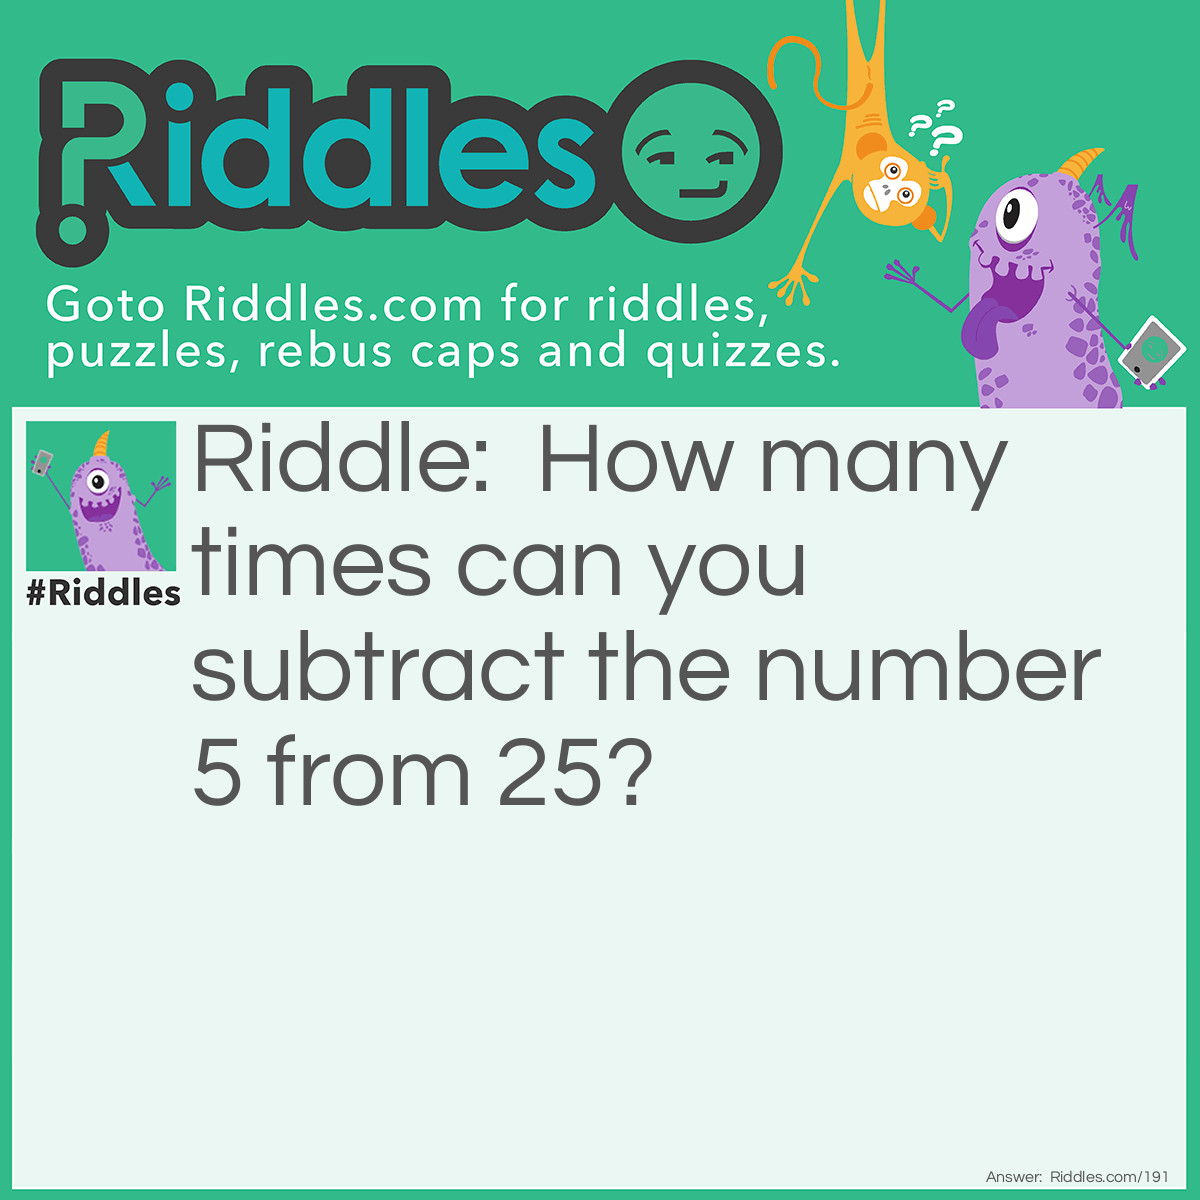 Riddle: How many times can you subtract the number 5 from 25? Answer: Once, because after you subtract 5 from 25 it becomes 20.